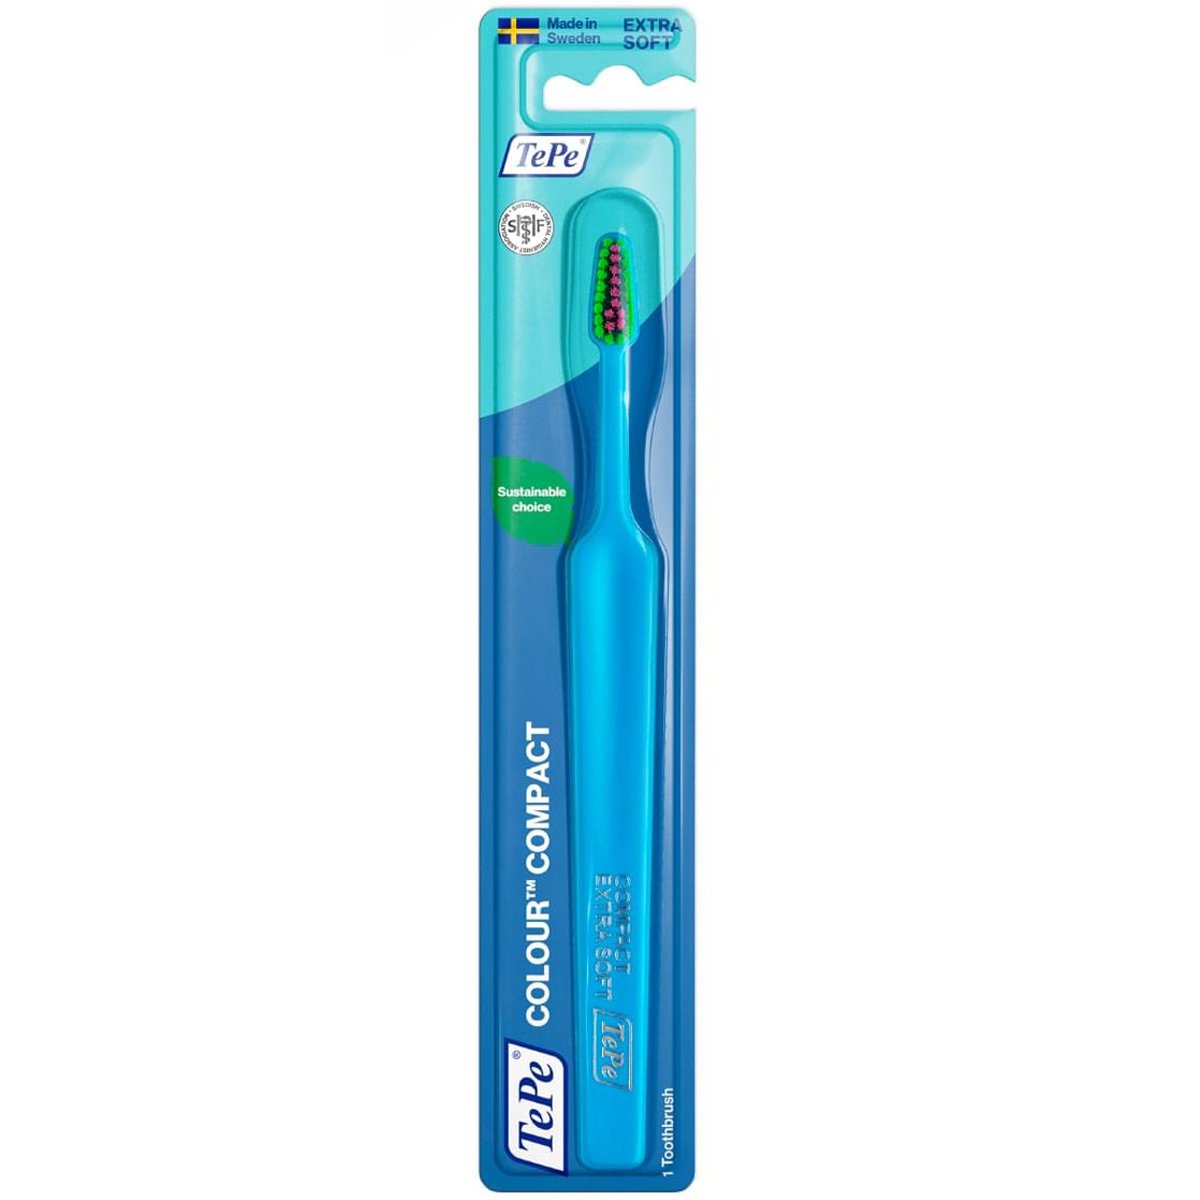 TePe Colour Compact Extra Soft Toothbrush Πολύ Μαλακή Οδοντόβουρτσα για Αποτελεσματικό & Απαλό Καθαρισμό 1 Τεμάχιο – Γαλάζιο